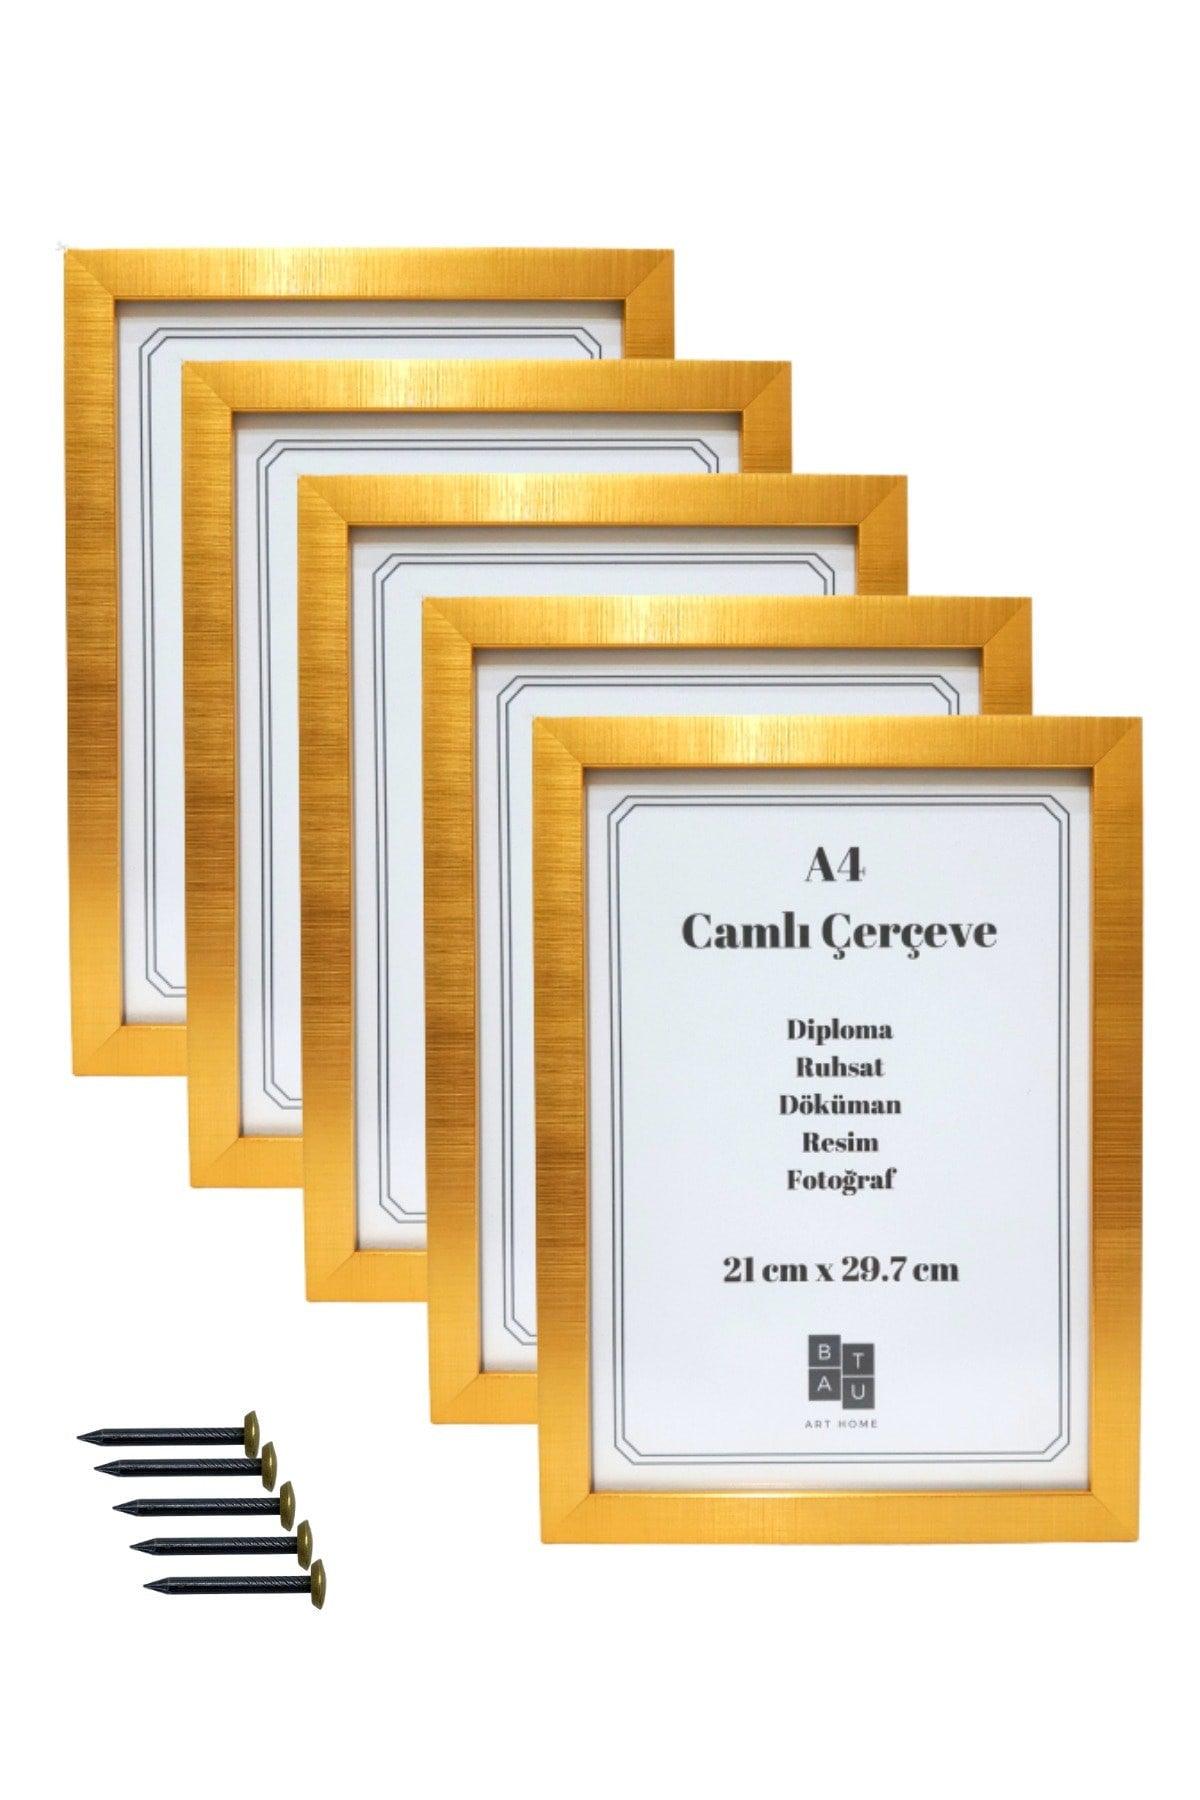 5 Pieces A4 Frame Real Glass Document Diploma Picture Photo Can Be Hanged Gold Color21x29.7 Cm - Swordslife